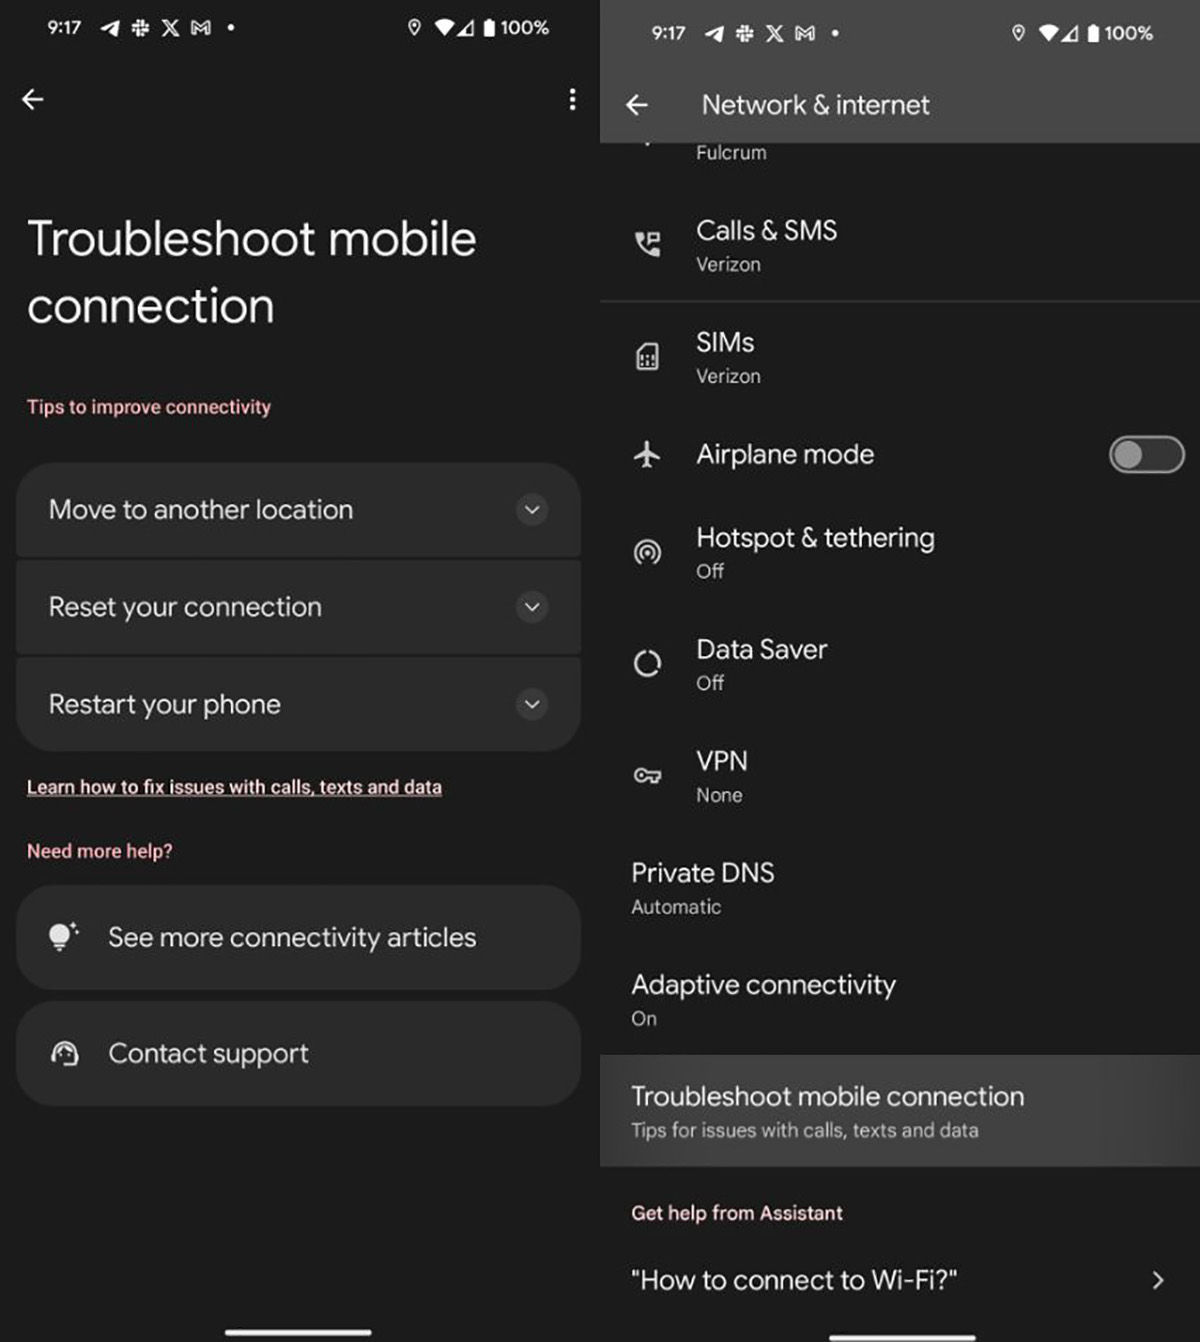 Troubleshoot mobile connection